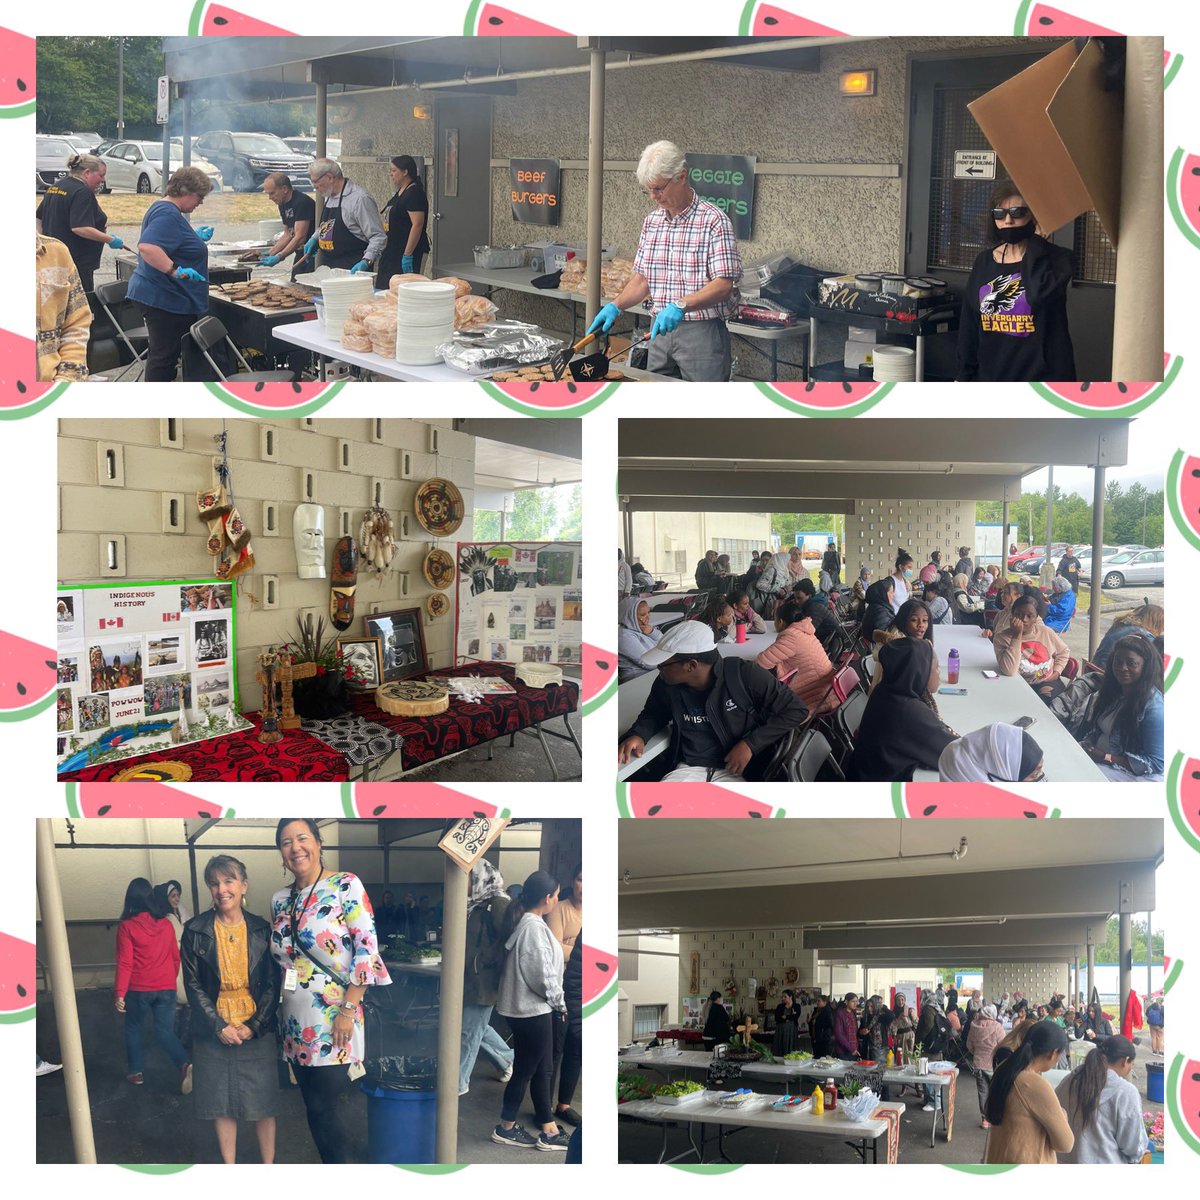 It’s BBQ time at @InvergarrySD36 ! Students and staff celebrating another amazing school year. @Surrey_Schools 
#studentleadership #sd36learn